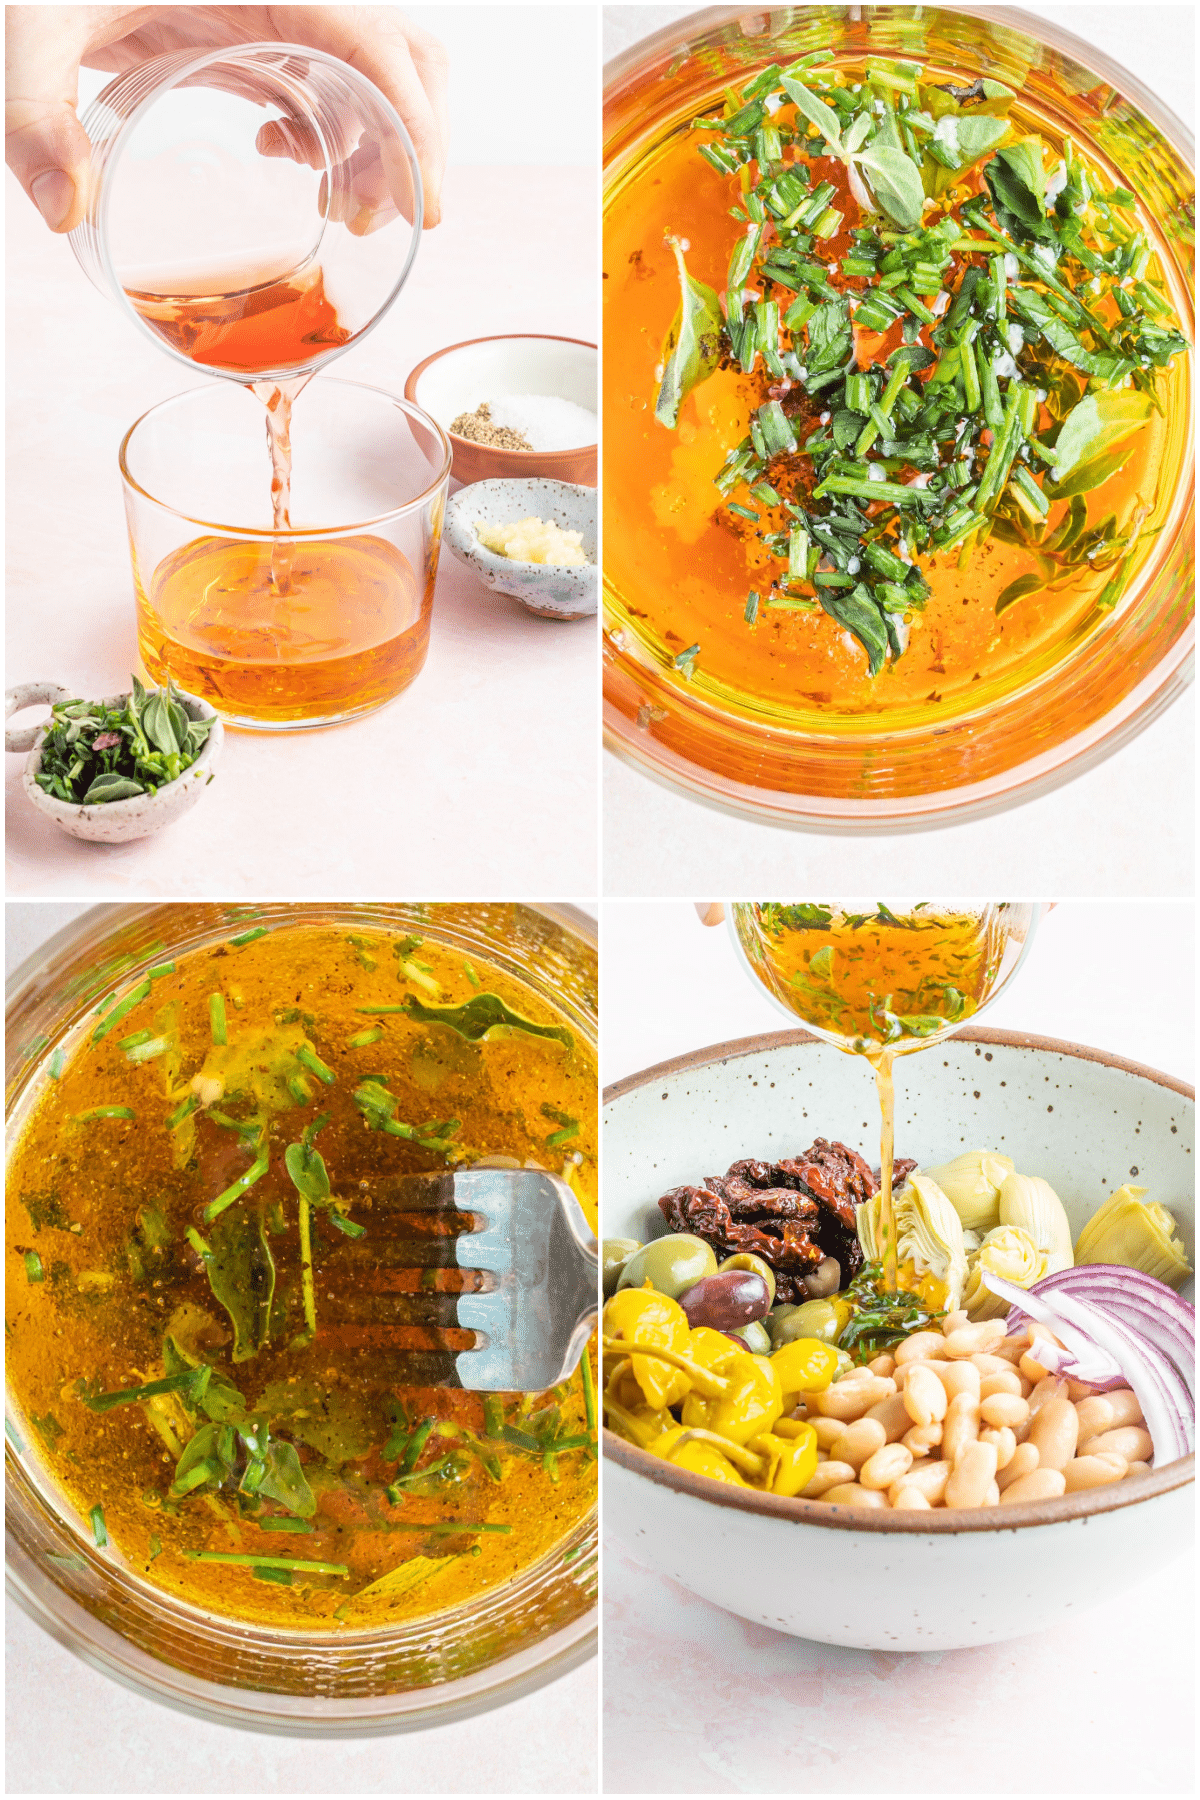 A four image collage showing how to make sun dried tomato salad dressing: pouring vinegar into oil, adding and mixing fresh herbs, pouring over a bowl of salad.